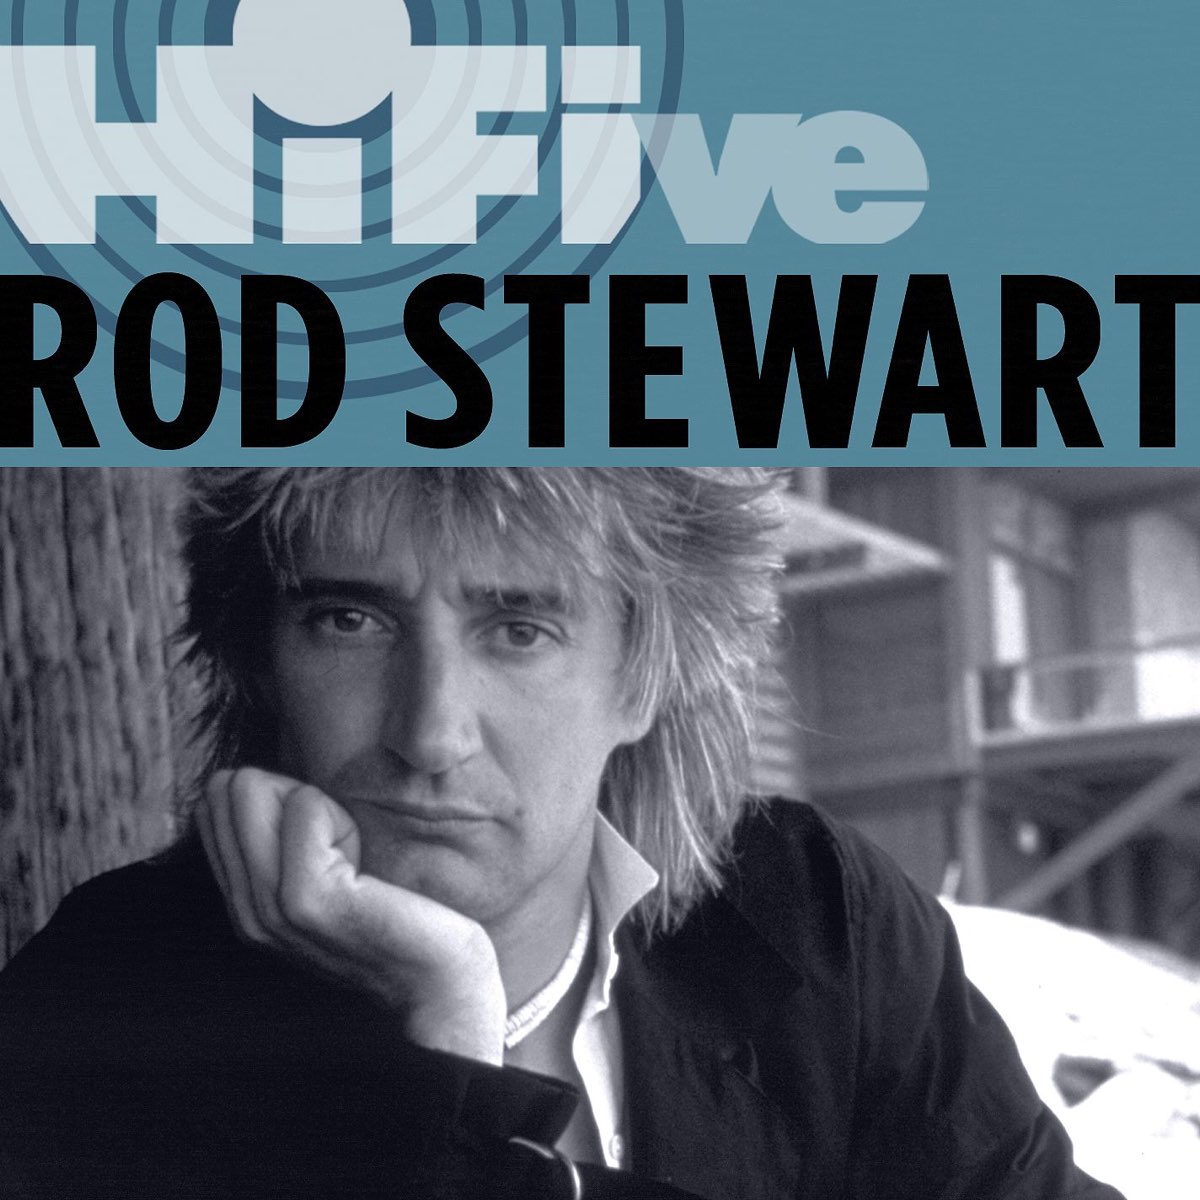 Rod Stewart. Rod Stewart the best of. Some guys have all the luck род Стюарт. Род Стюарт альбомы. Род стюарт лучшие песни